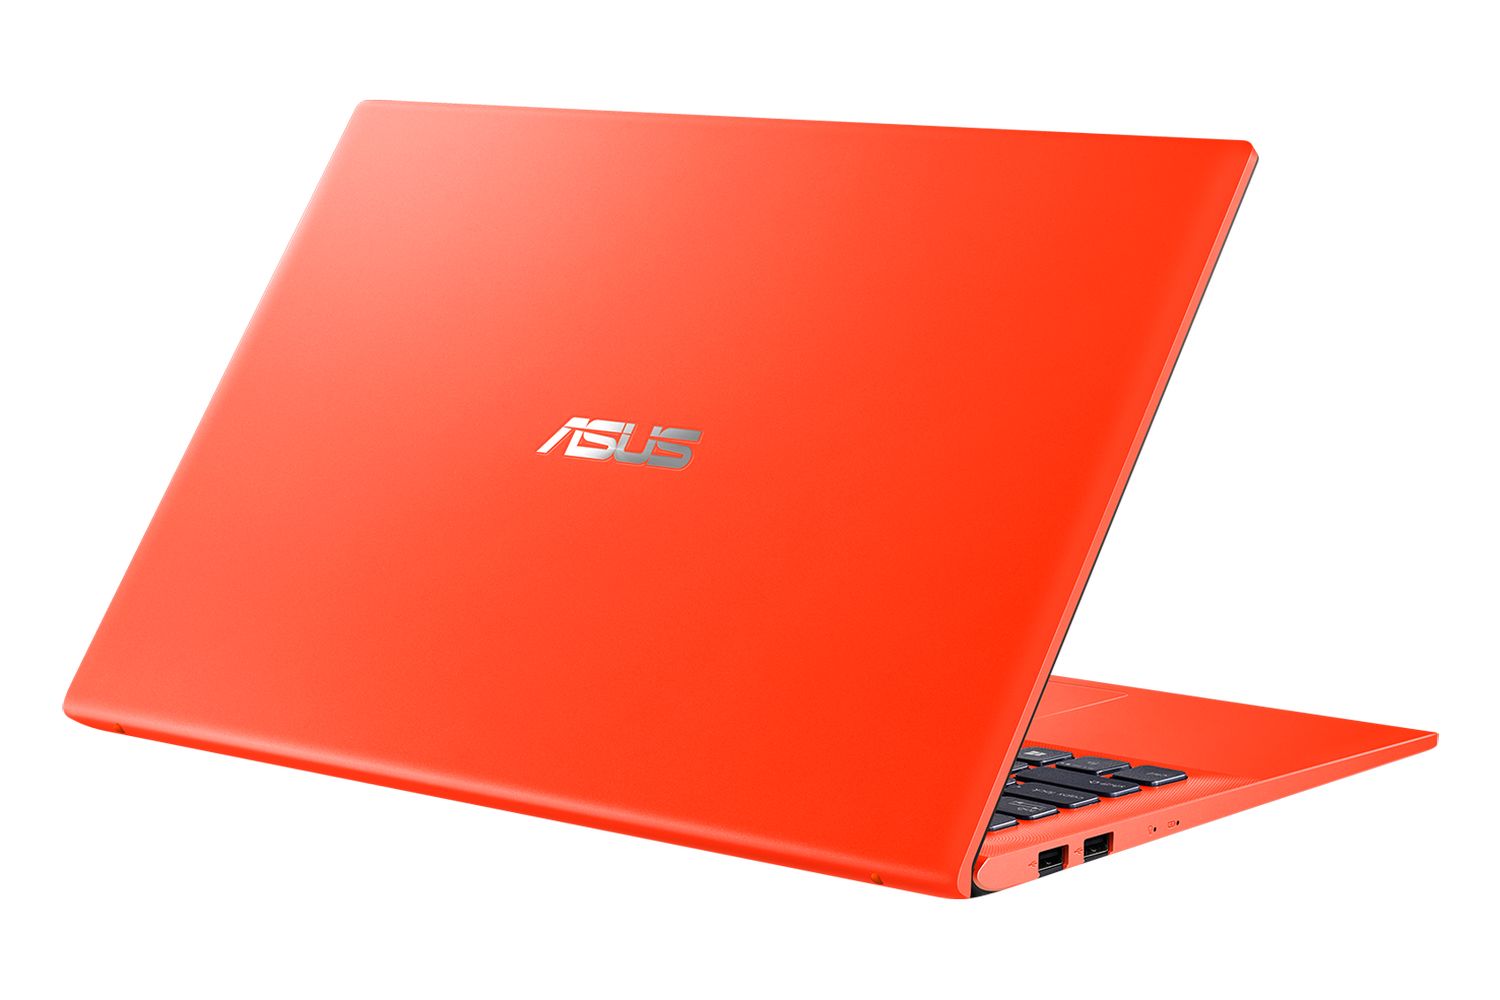 asus introduces zenbook s13 with thinnest bezels ces 2019 vivobook 14 15 trending coral crush in